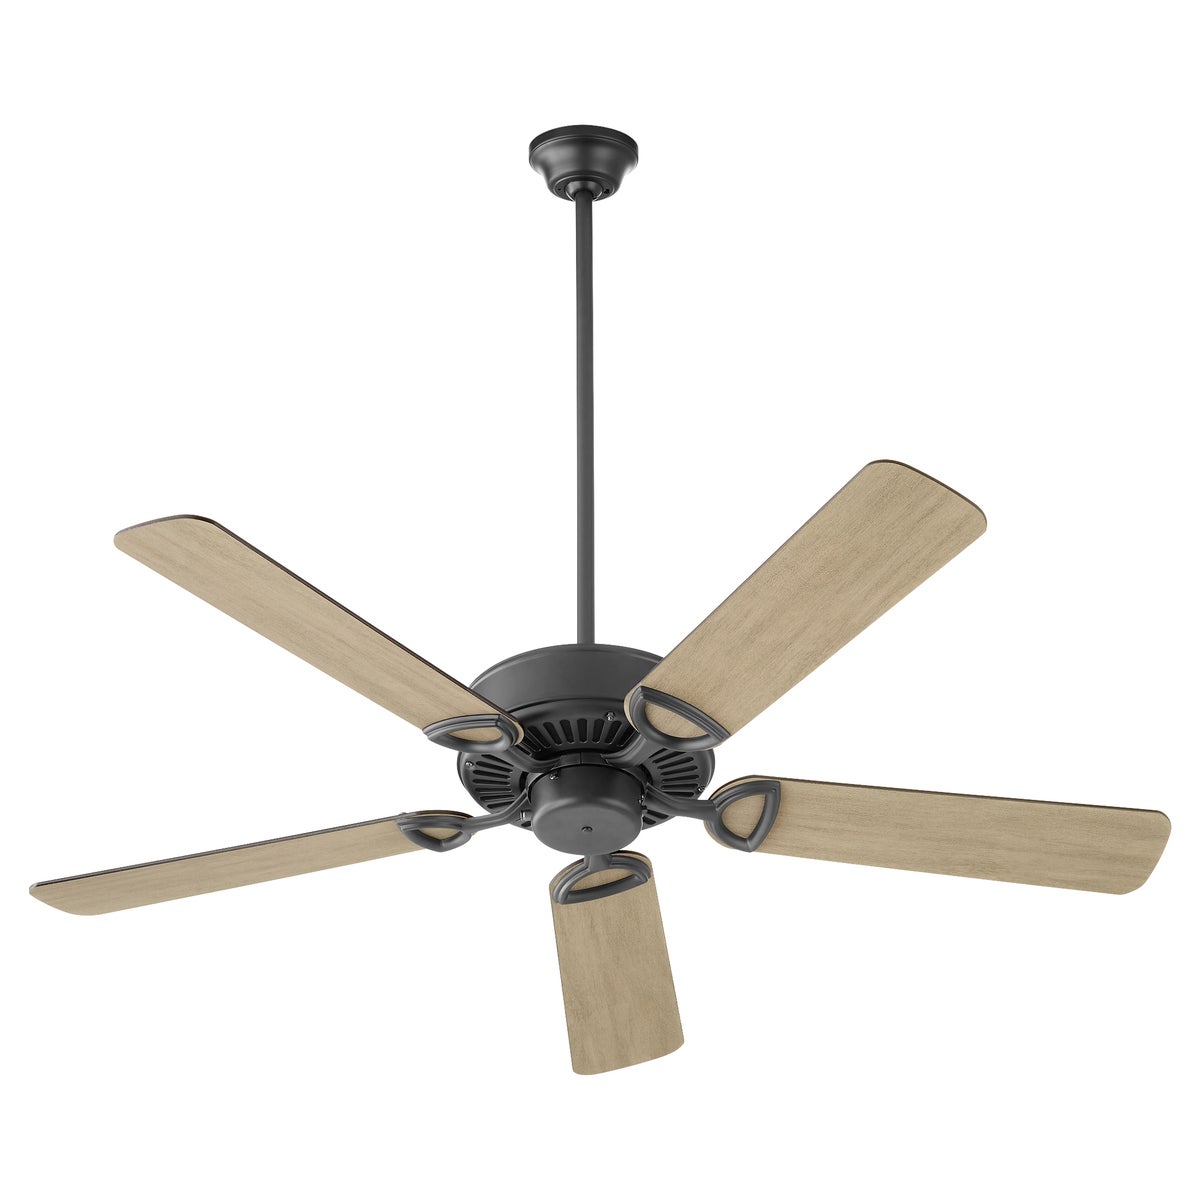 Traditional Ceiling Fan with Wooden Blades, a classic design that complements wooden items in your rooms. Brand: Quorum International. Motor Size: 153x15. Watts: 66/29/9. Amps: .58/.39/.21. RPMs: 175/104/58. Number of Blades: 5. Blade Pitch: 14 Degrees. Certifications: UL Listed. Safety Rating: Dry Location. Dimensions: 12"H x 52"W. Warranty: Limited Lifetime.